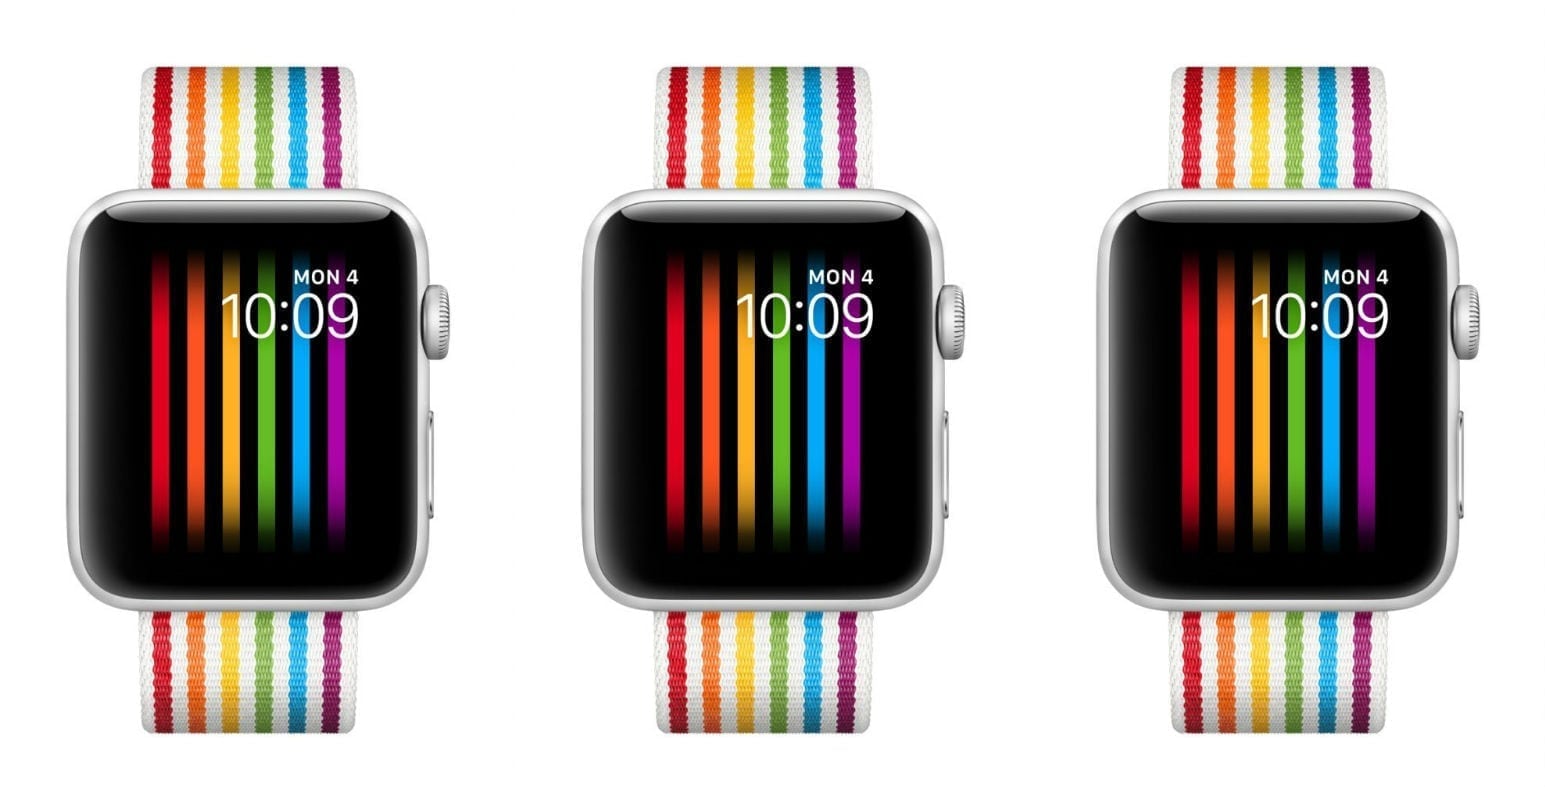 Skip Prime Day and save $320 on this brand-new Apple Watch right now |  Macworld